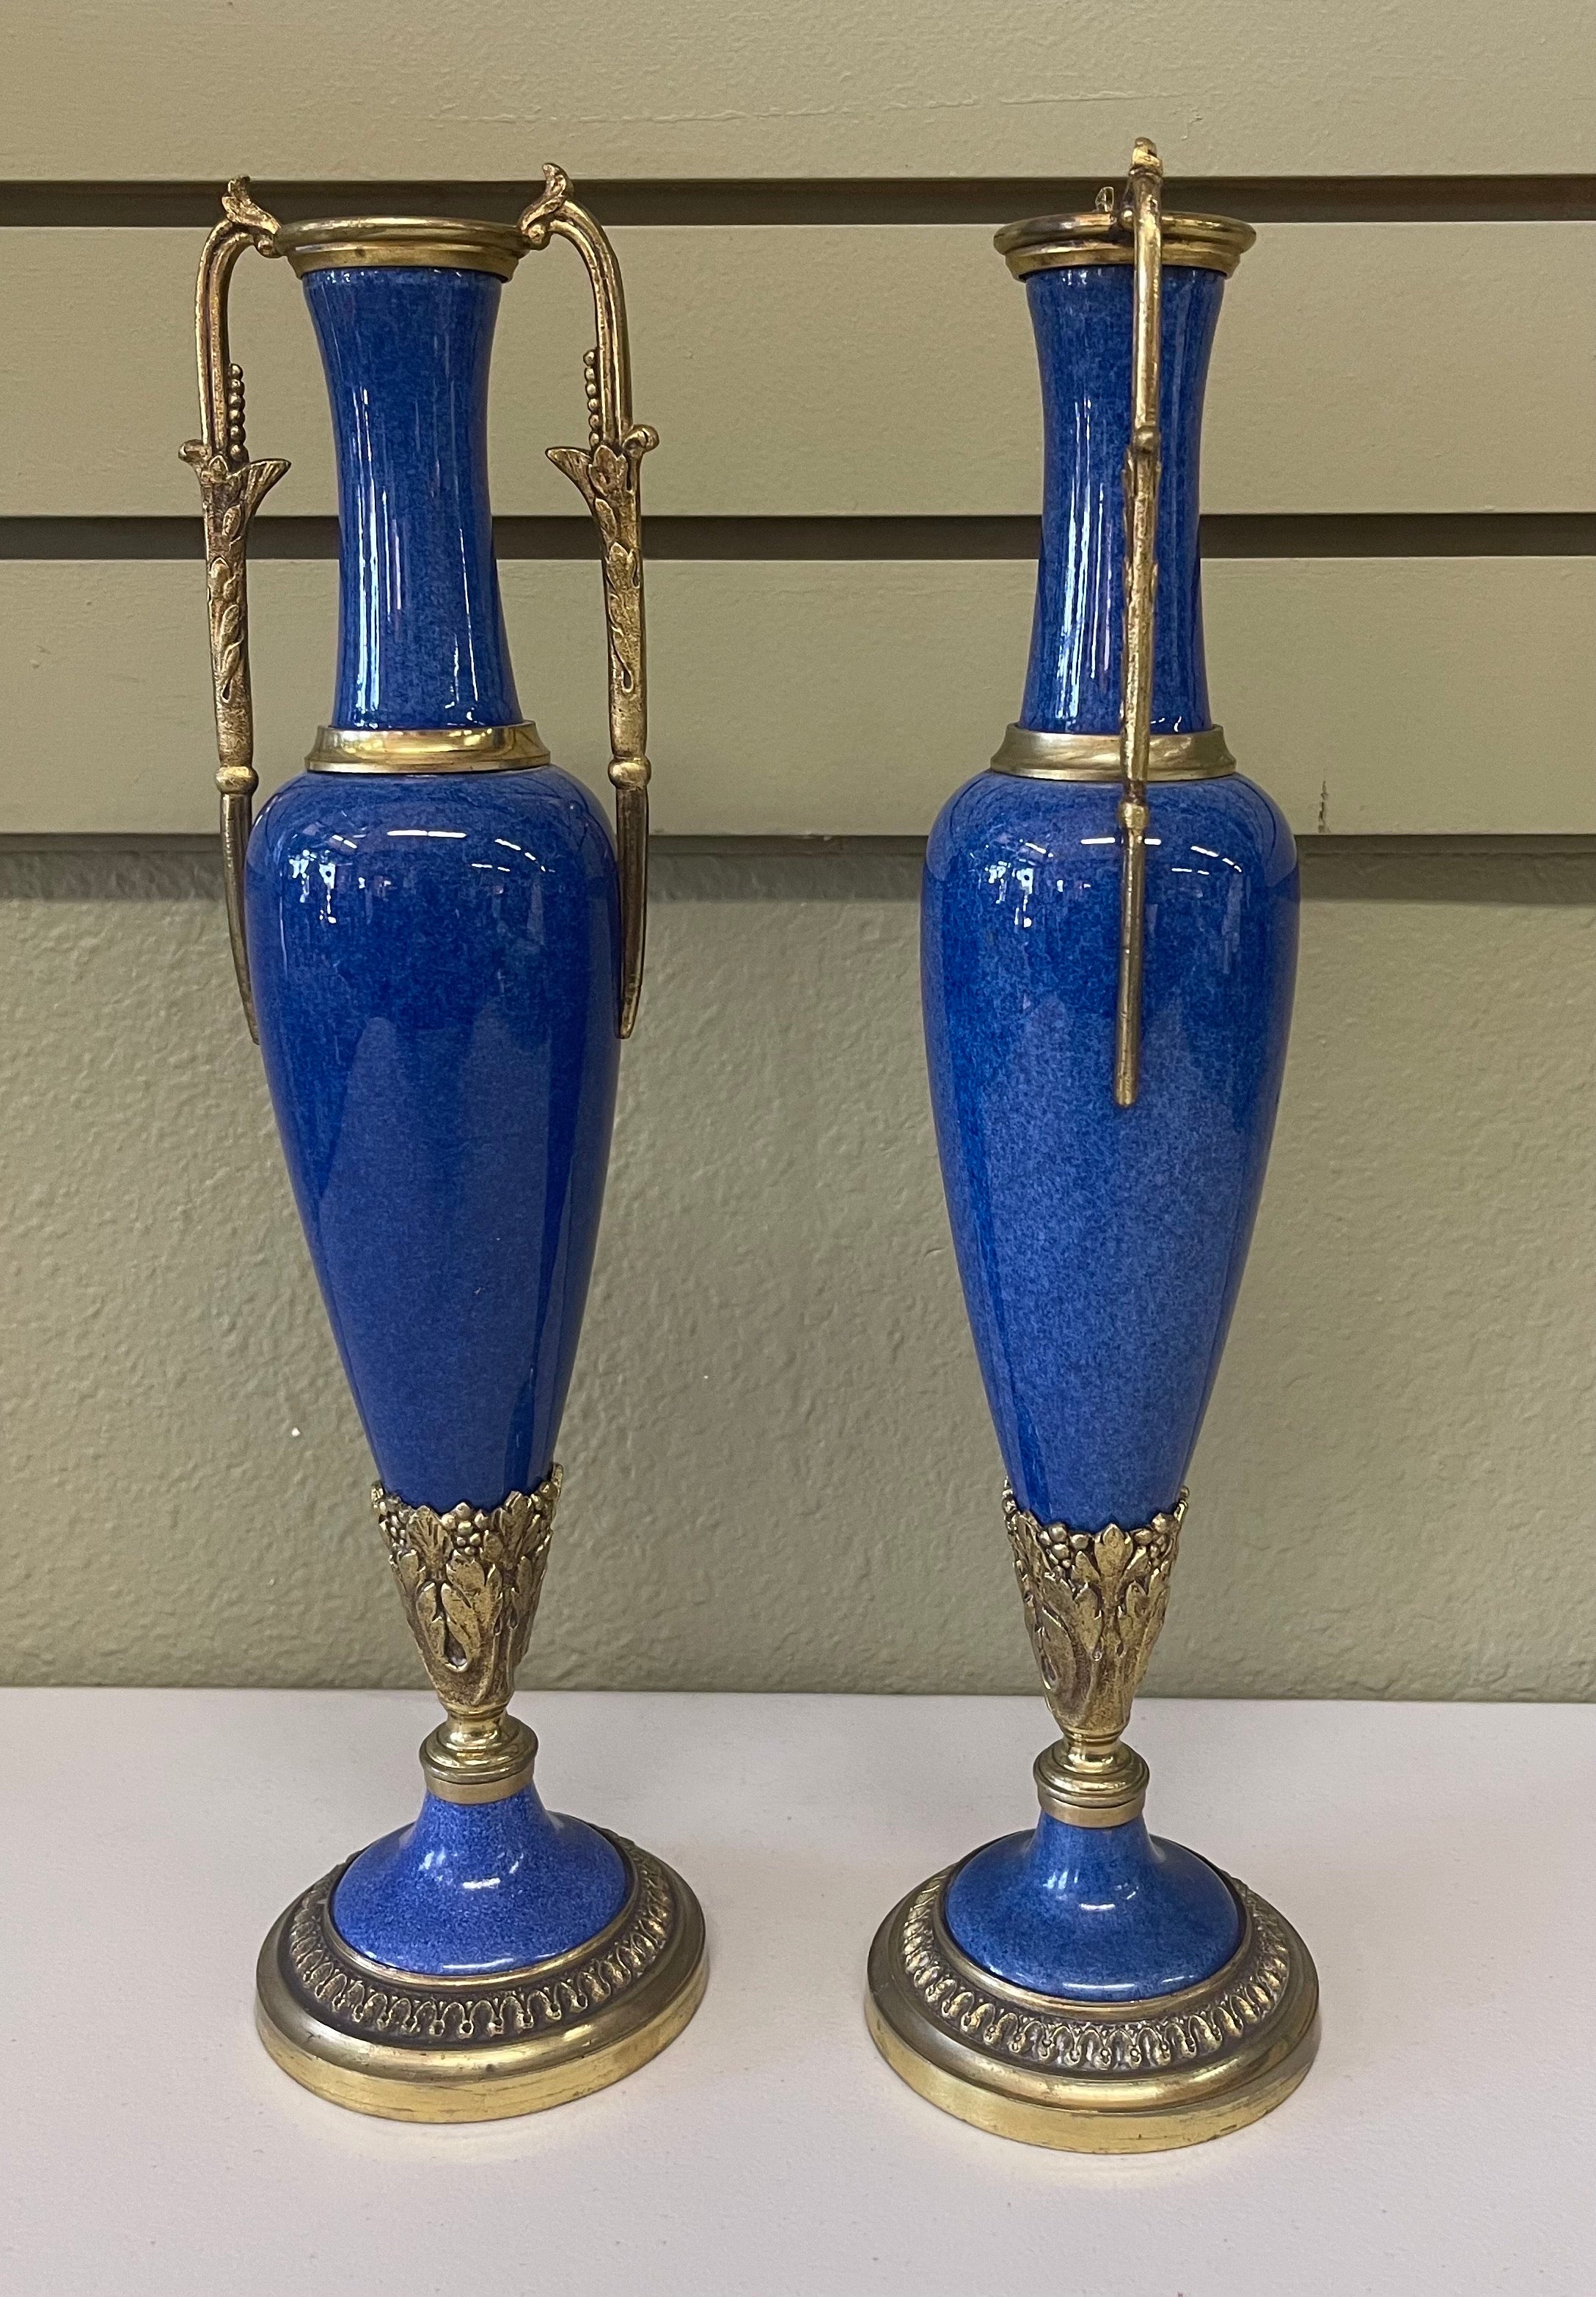 Exquisite pair of lapis blue porcelain and brass garnitures by Sevres of France, circa late 1800s. The set is in very good antique condition with no chips or cracks. Gorgeous pair! #2209.